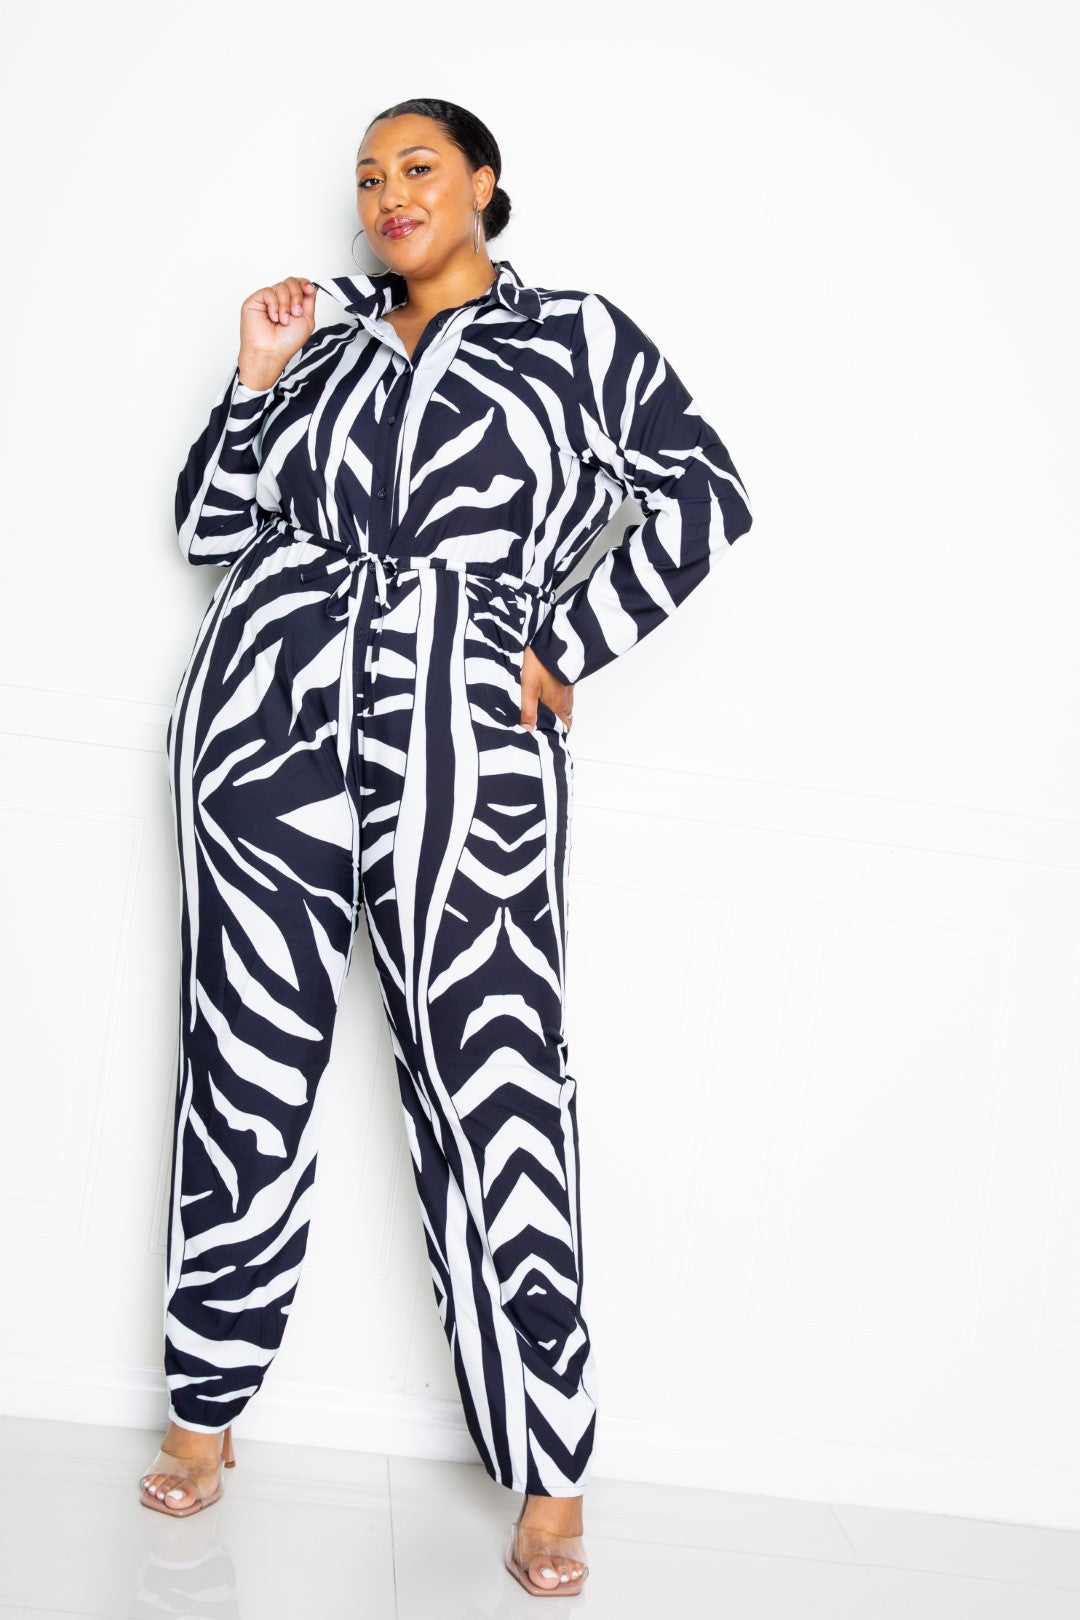 Button Up Long Sleeve Jumpsuit - Black/White / 1XL Clothing Girl Code